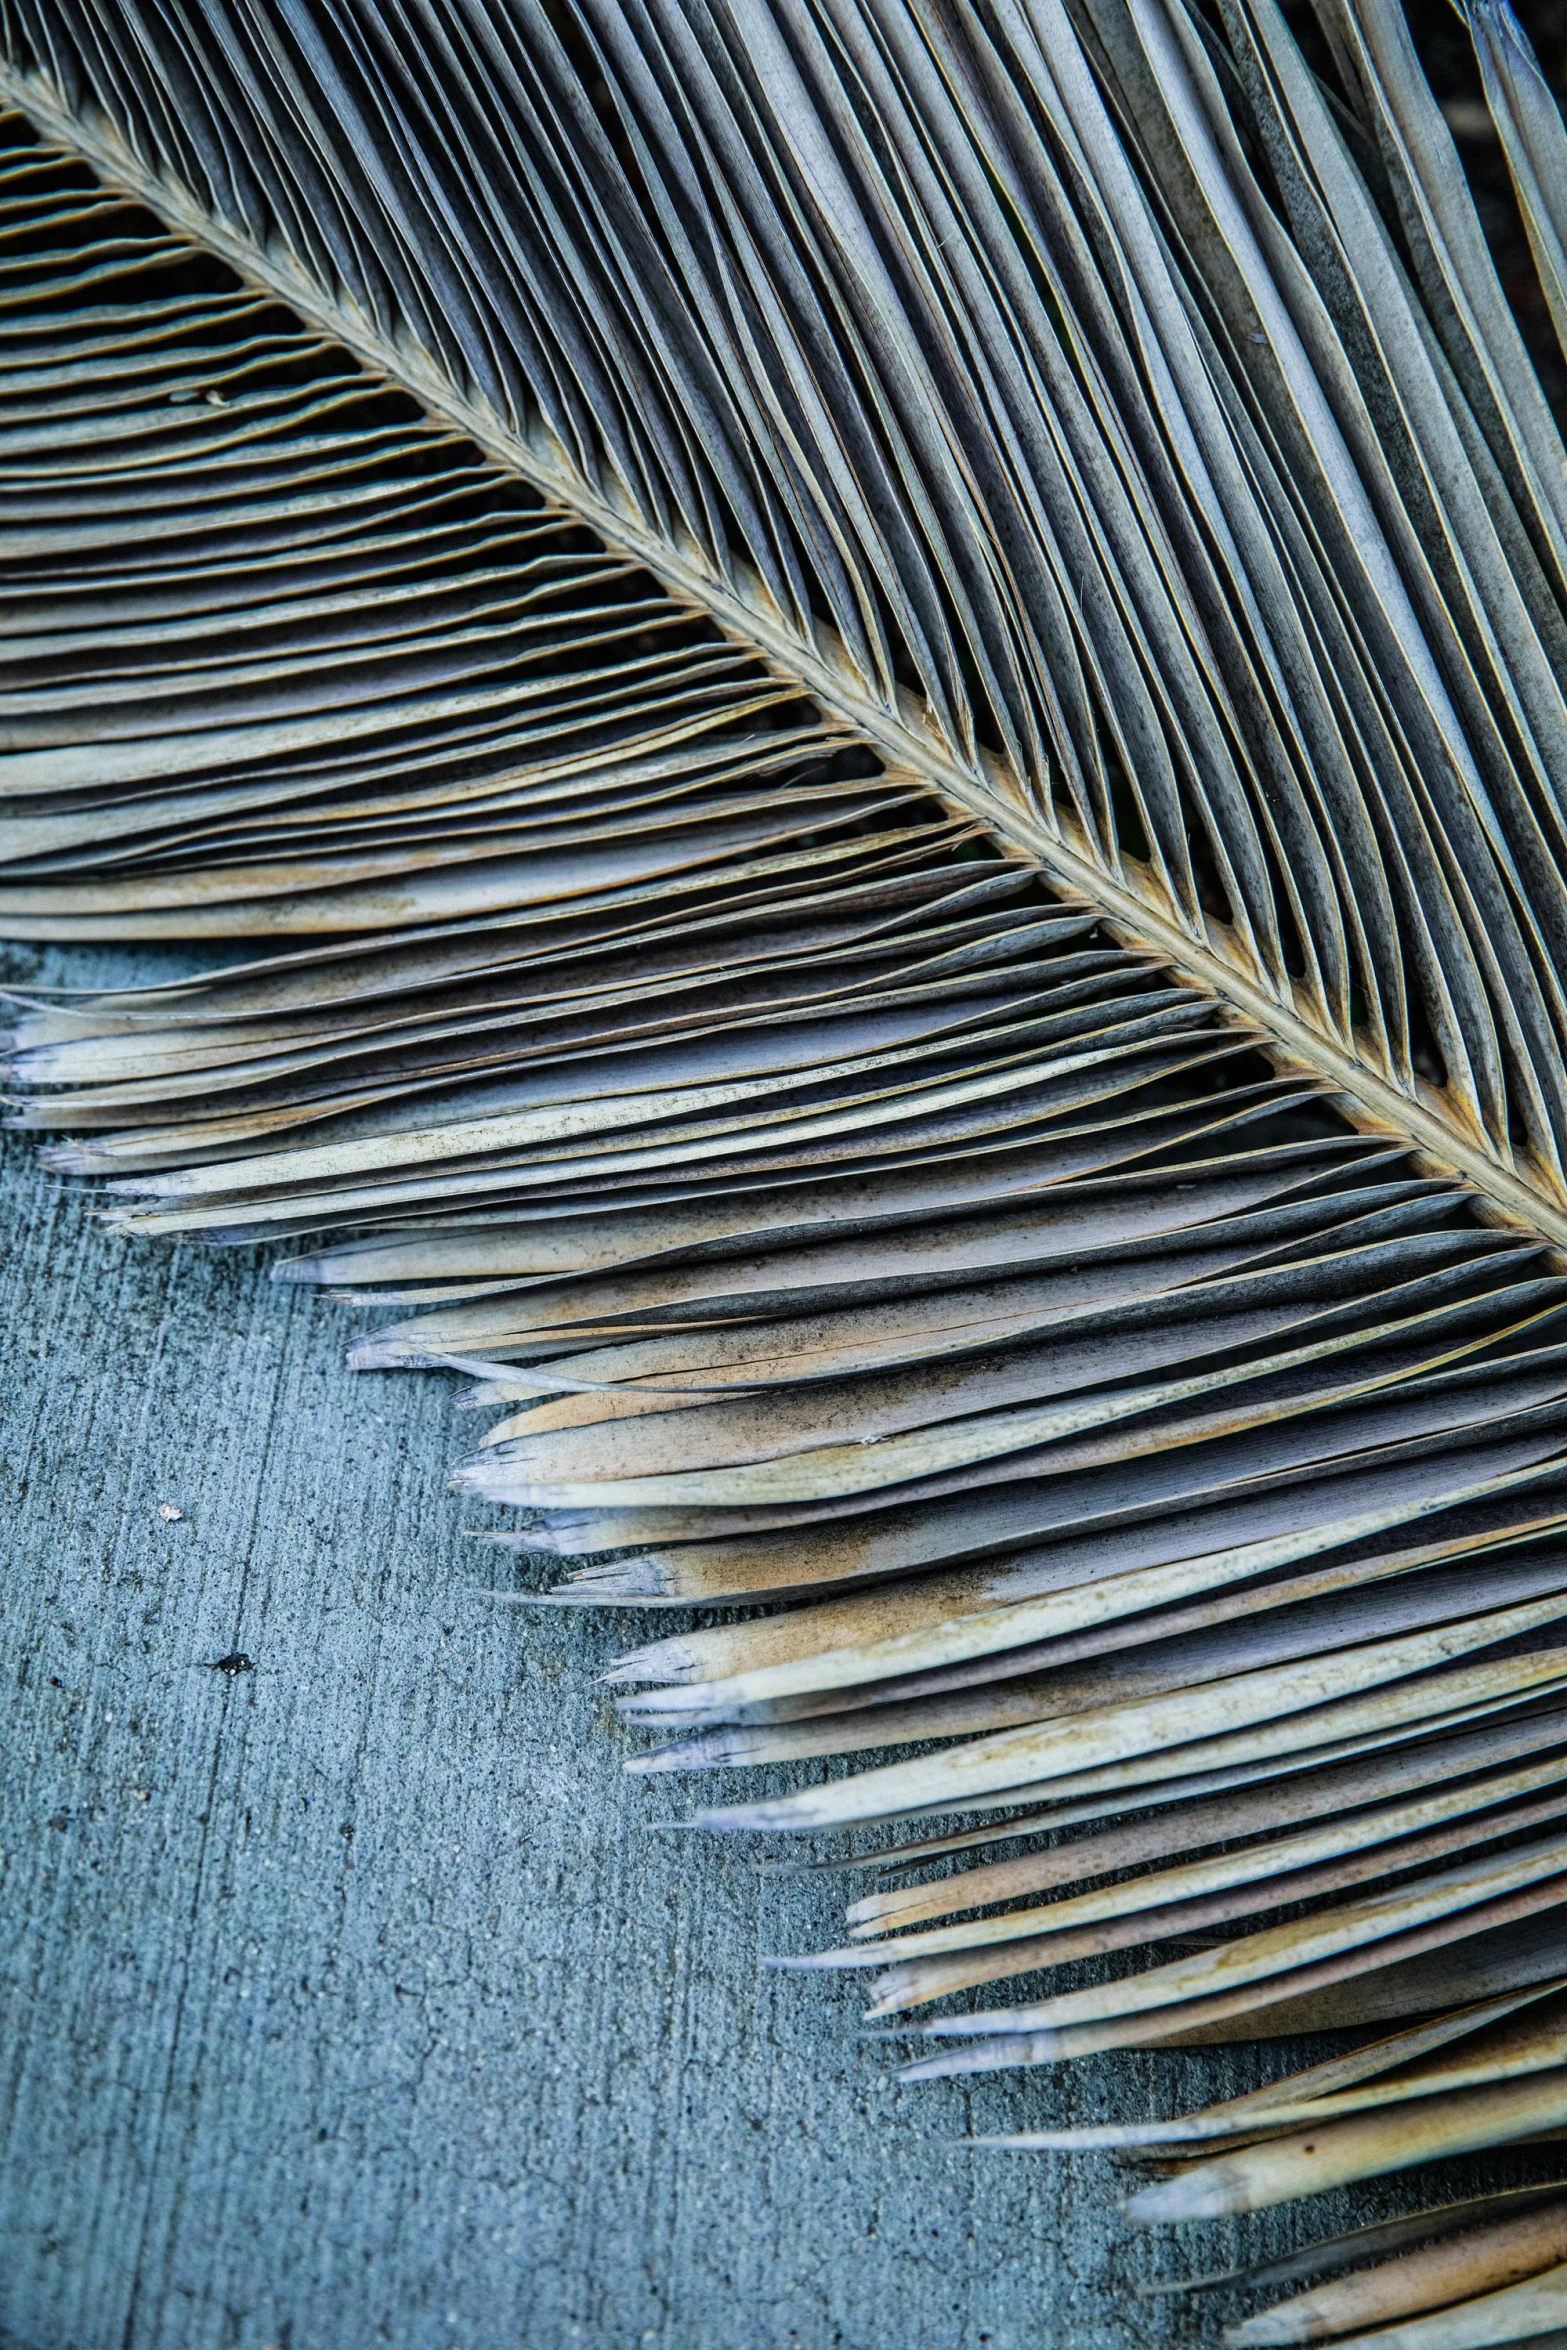 this is a picture of a blue peacock feather